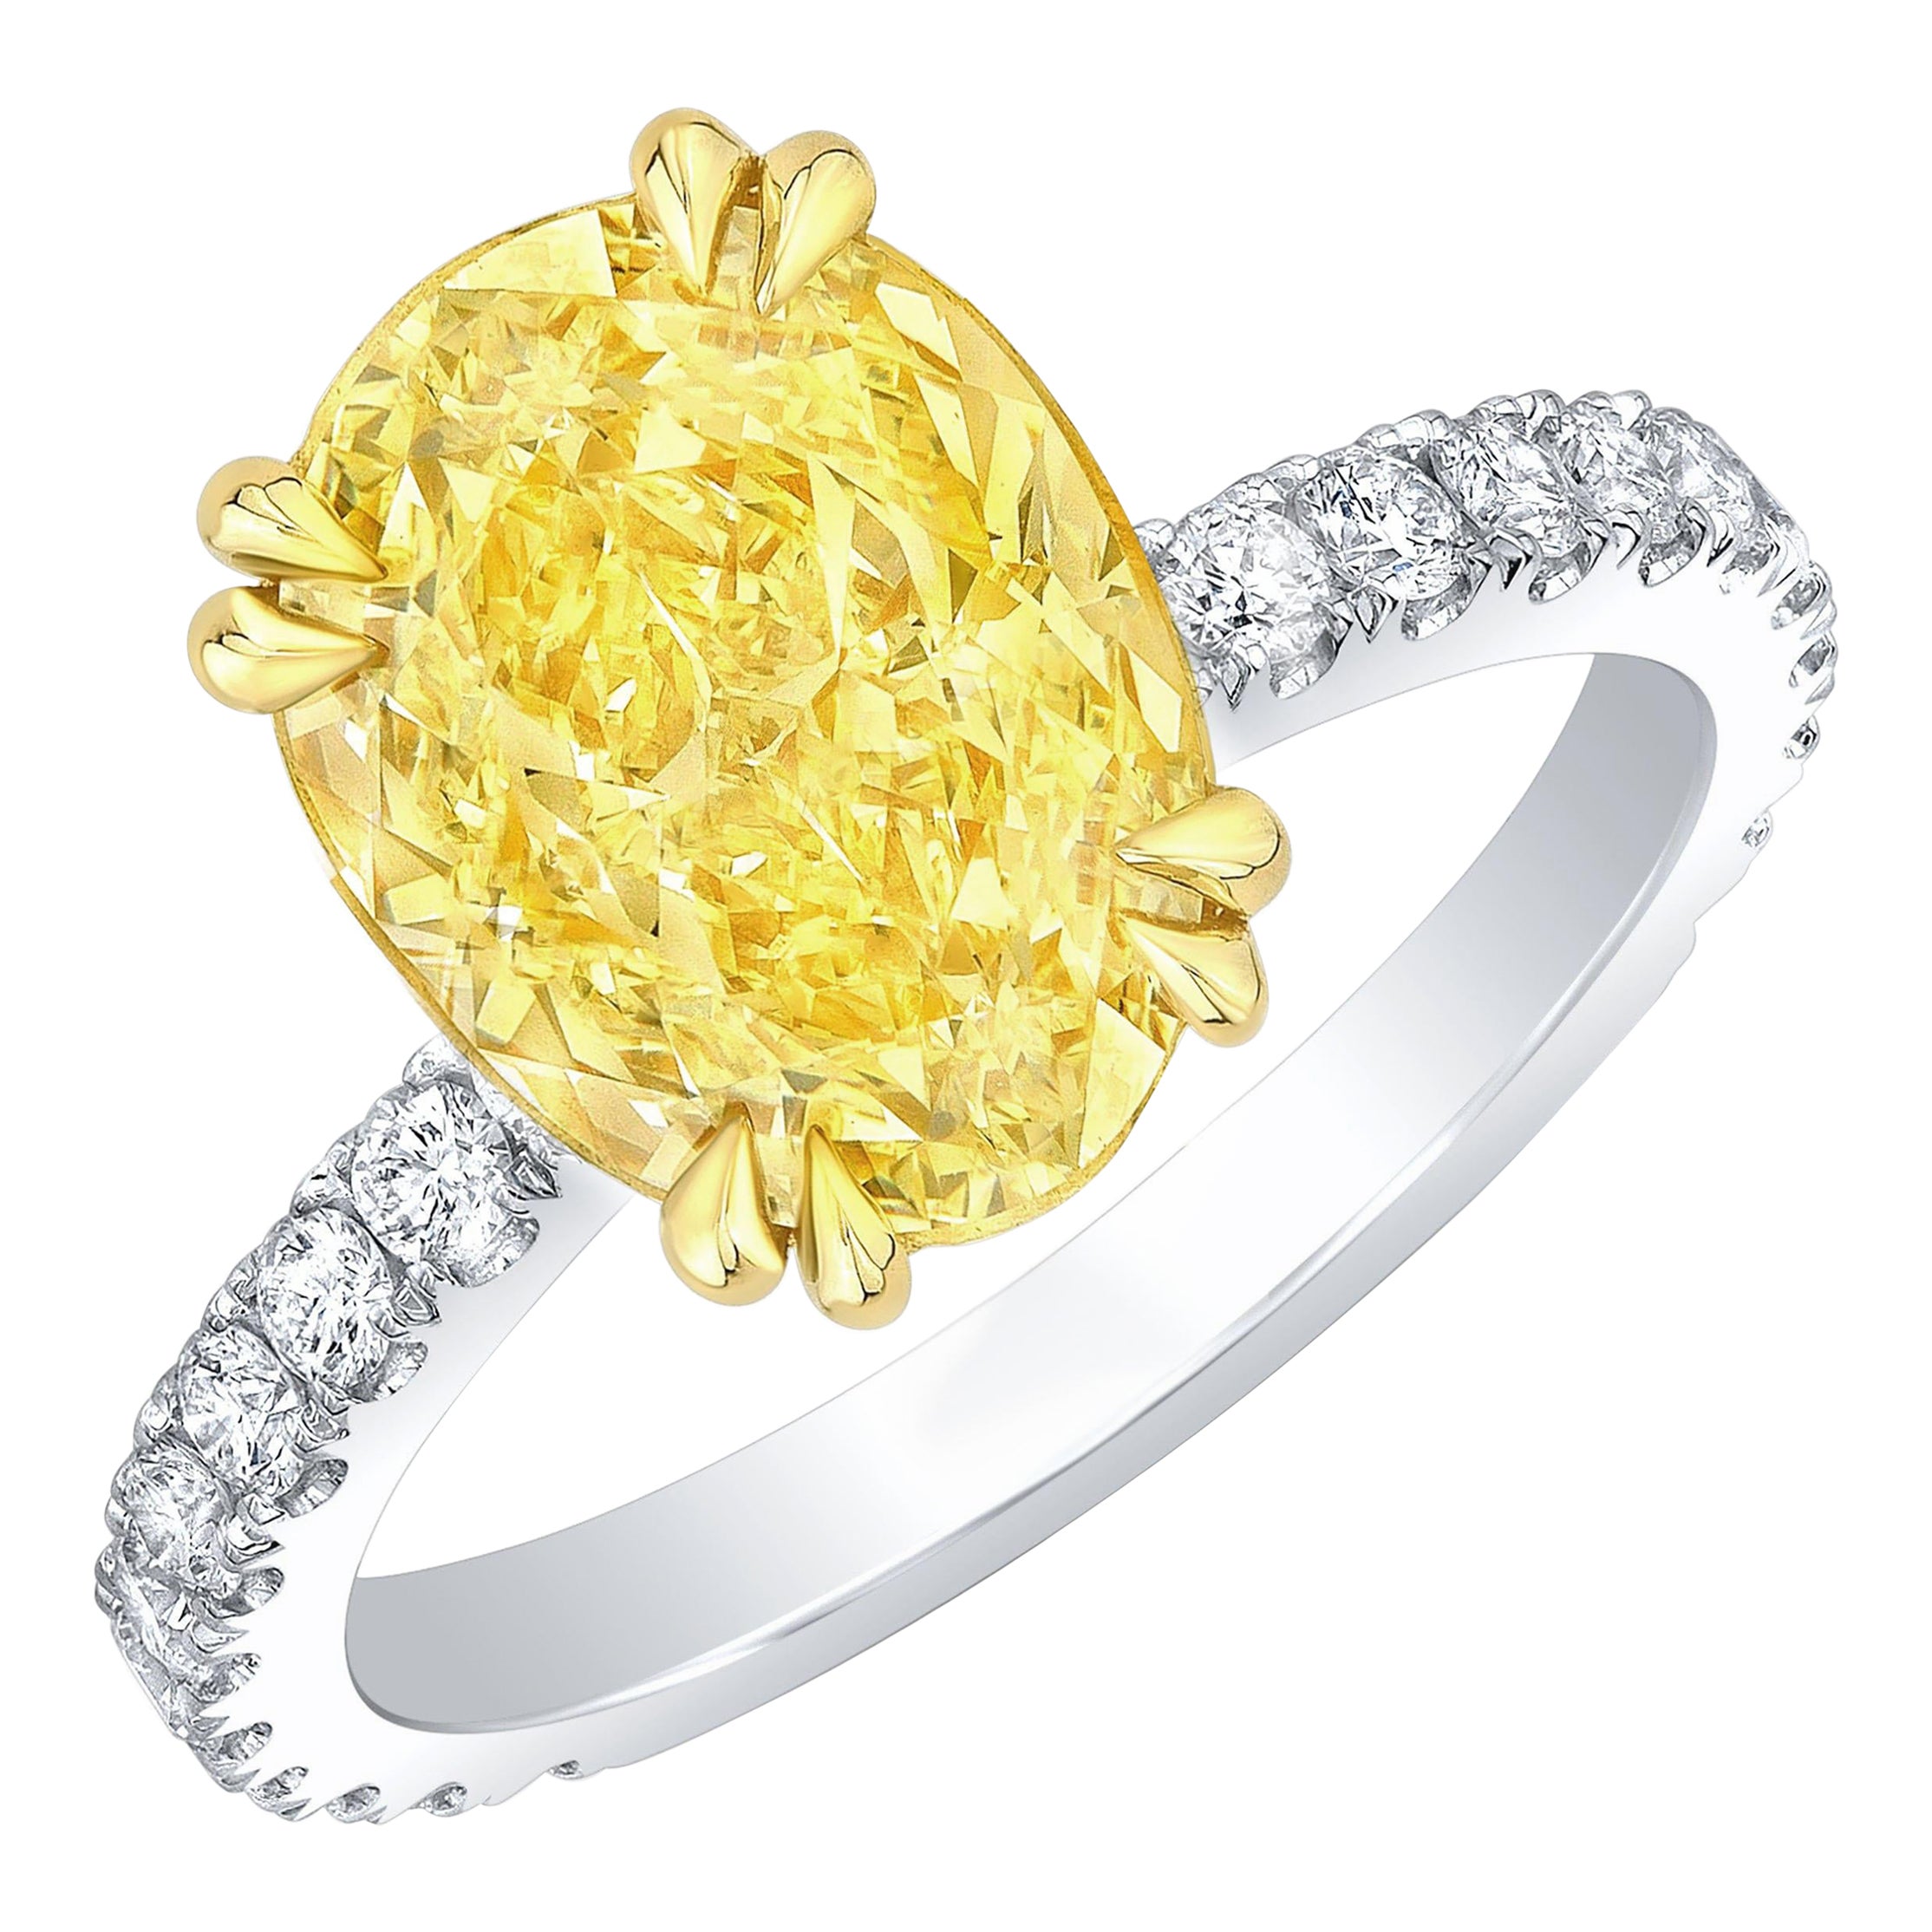 3.70 Carat Canary Fancy Light Yellow Oval Engagement Ring Internally Flawless For Sale